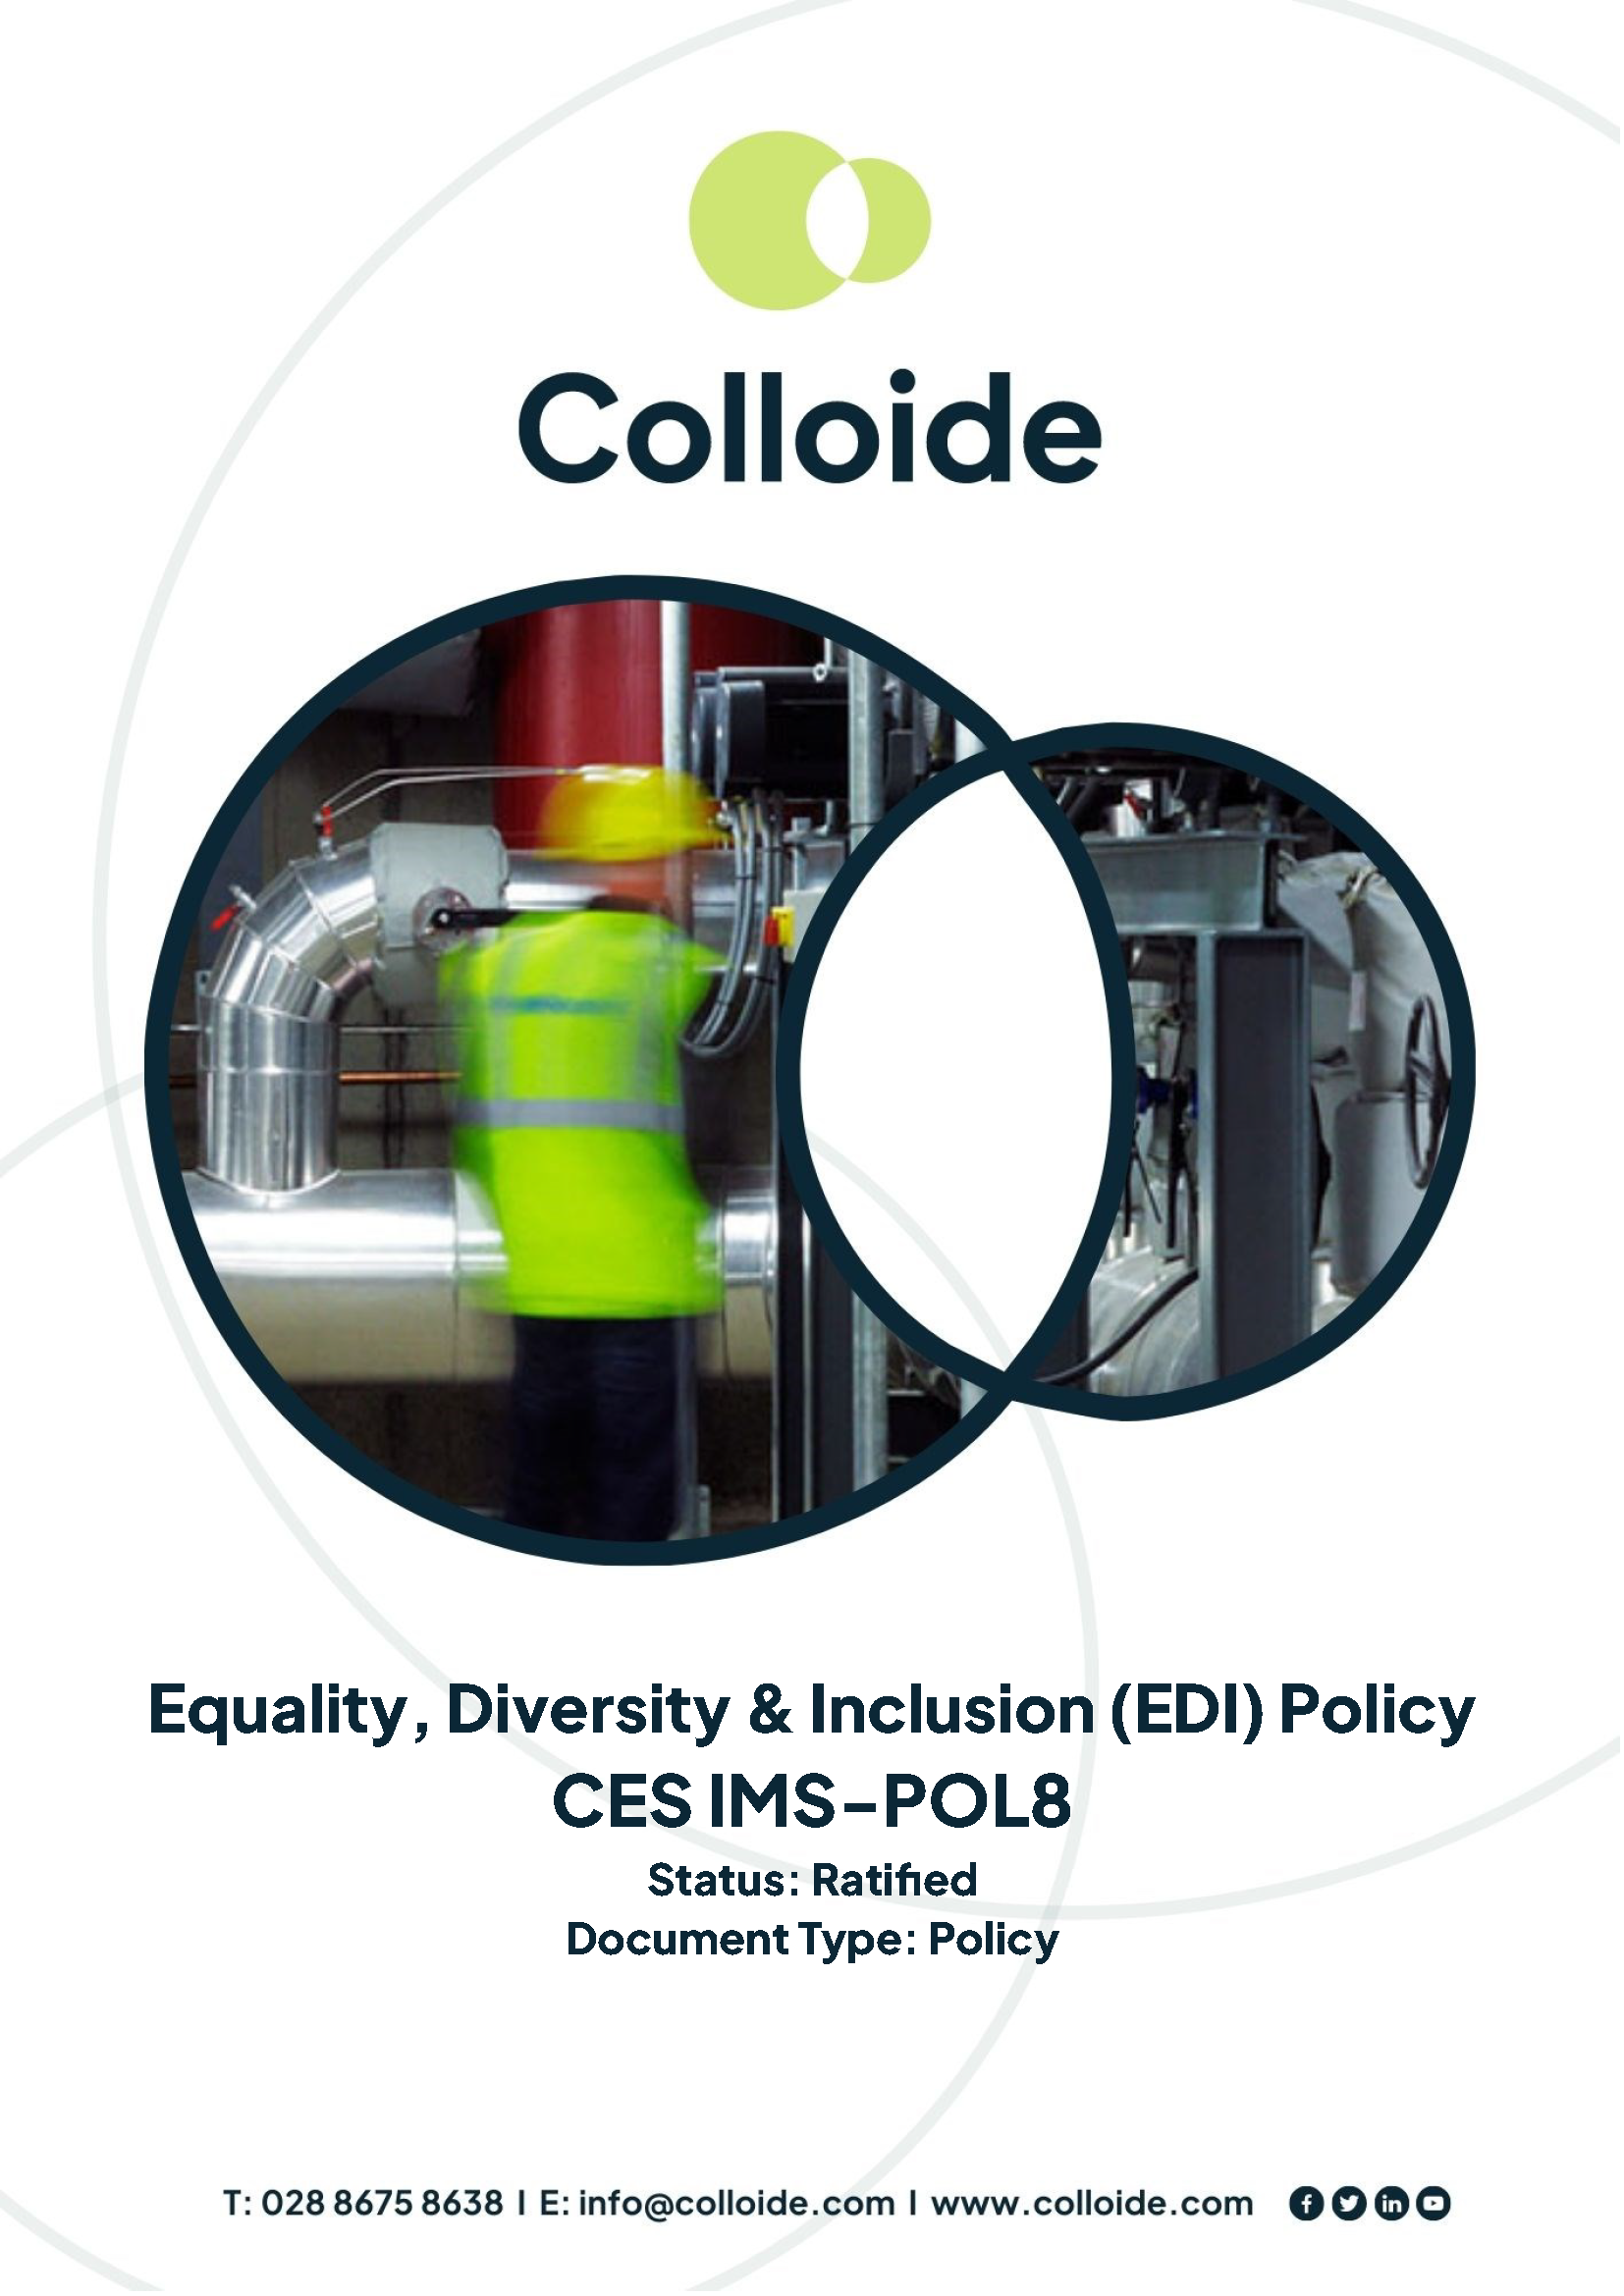 Cover Image for CES IMS-POL8 – Equality, Diversity & Inclusion (EDI) Policy